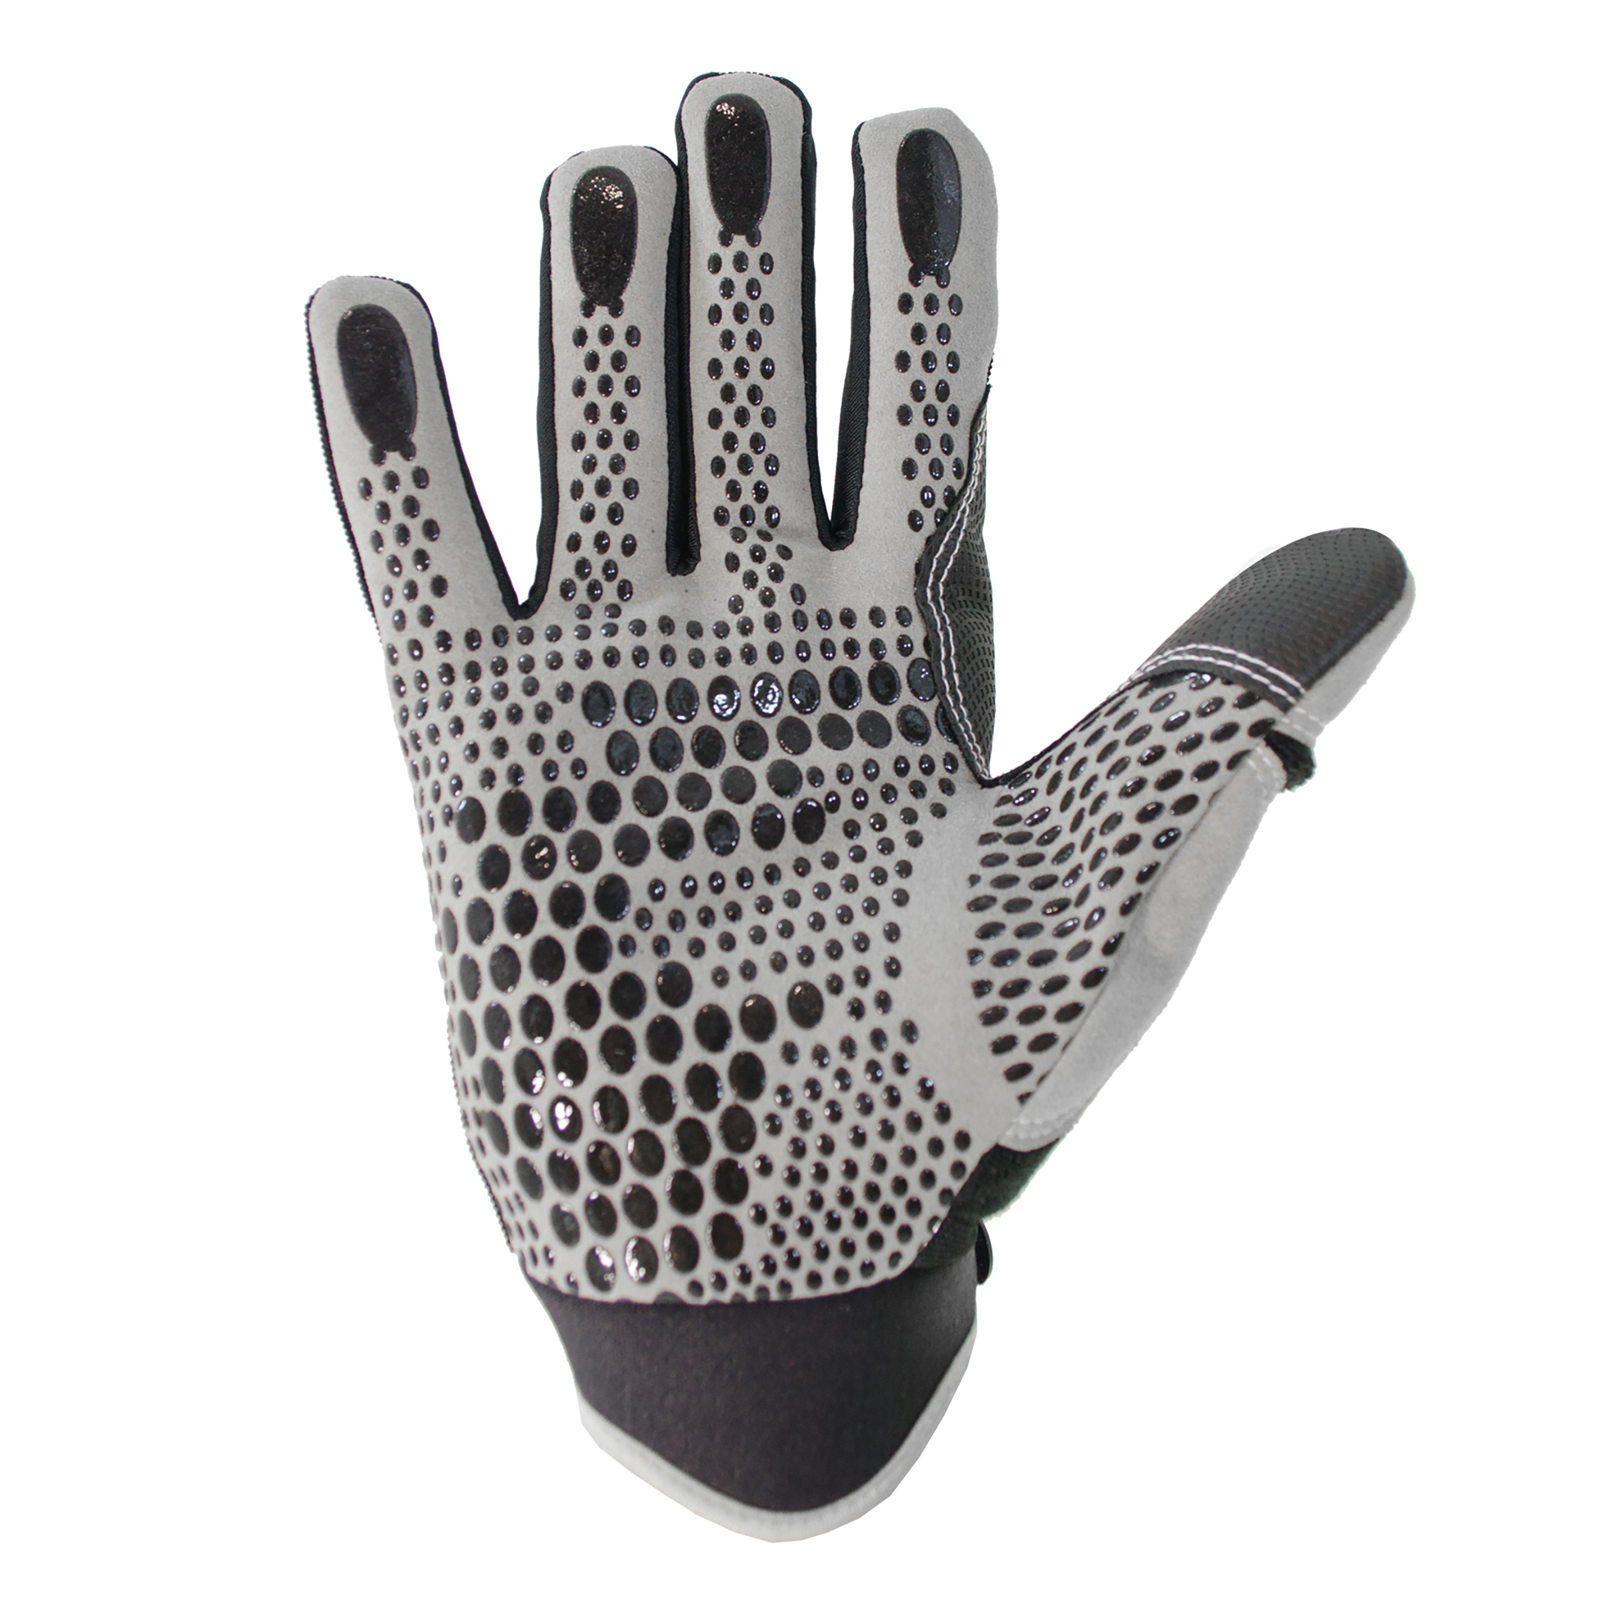 Palm view of the black JORESTECH safety work glove with anti slip silicone black dotted palms 